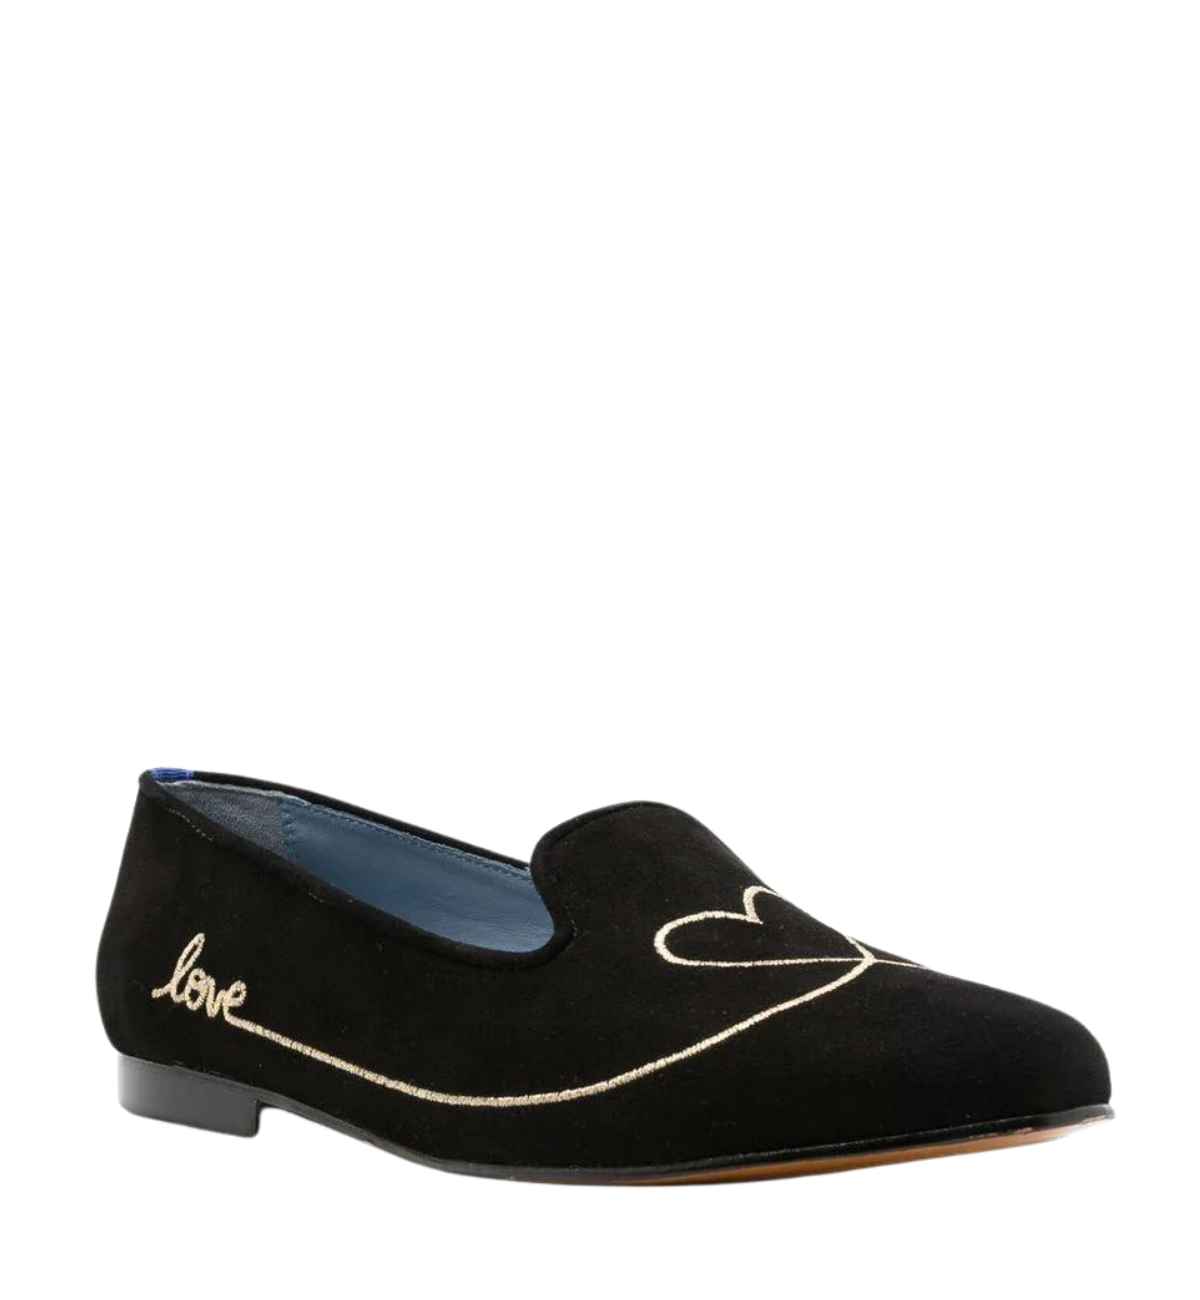 Black heart shoe in loafer style with herart embroidery at toe and love embroidery on the side on white background.